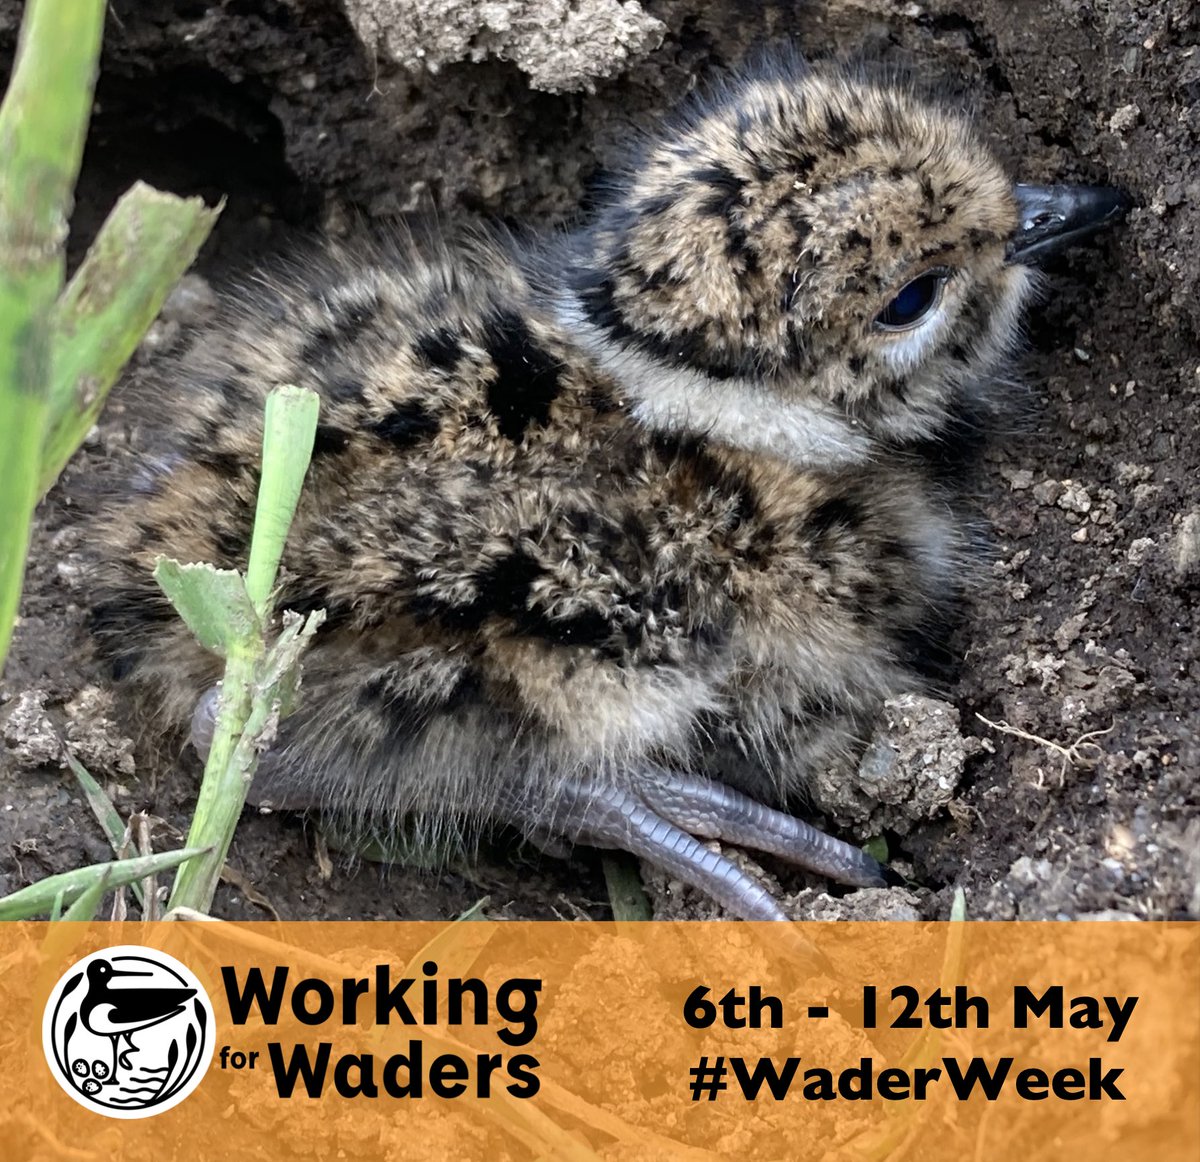 Waders are on their nests, and the first chicks are starting to appear - it must be #waderweek! Working for Waders is made up of many different partners from @RSPBScotland & @BTO_Scotland to @Gameandwildlife & @ScotGamekeepers plus individual farmers and land managers 1/5